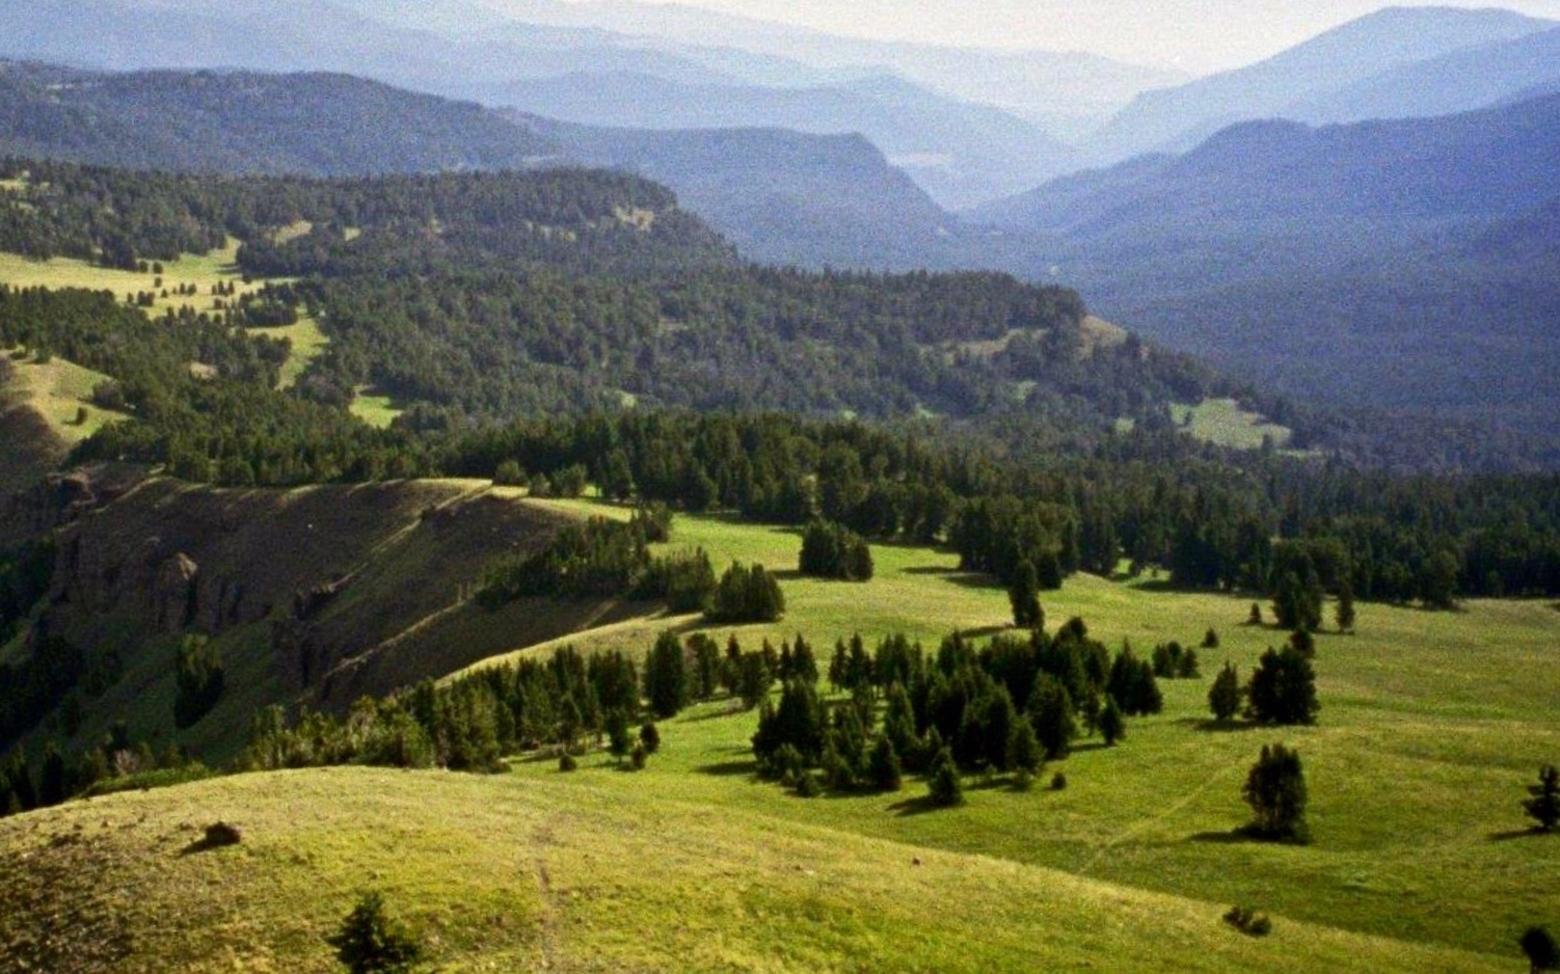 Proclaimed by prominent scientists as a &quot;complete, intact ecosystem&quot; within the larger Greater Yellowstone Ecosystem, the Hyalite-Porcupine-Buffalo Horn Wilderness Study Area in the Gallatin Mountains is renowned for its wildlife. It holds more diversity of species than most national parks in the Lower 48. Right now, it sits at the center of a huge debate over how to safeguard it amid rising recreation pressure and impacts from climate change. Photo courtesy Steve Moore/Craighead Institute